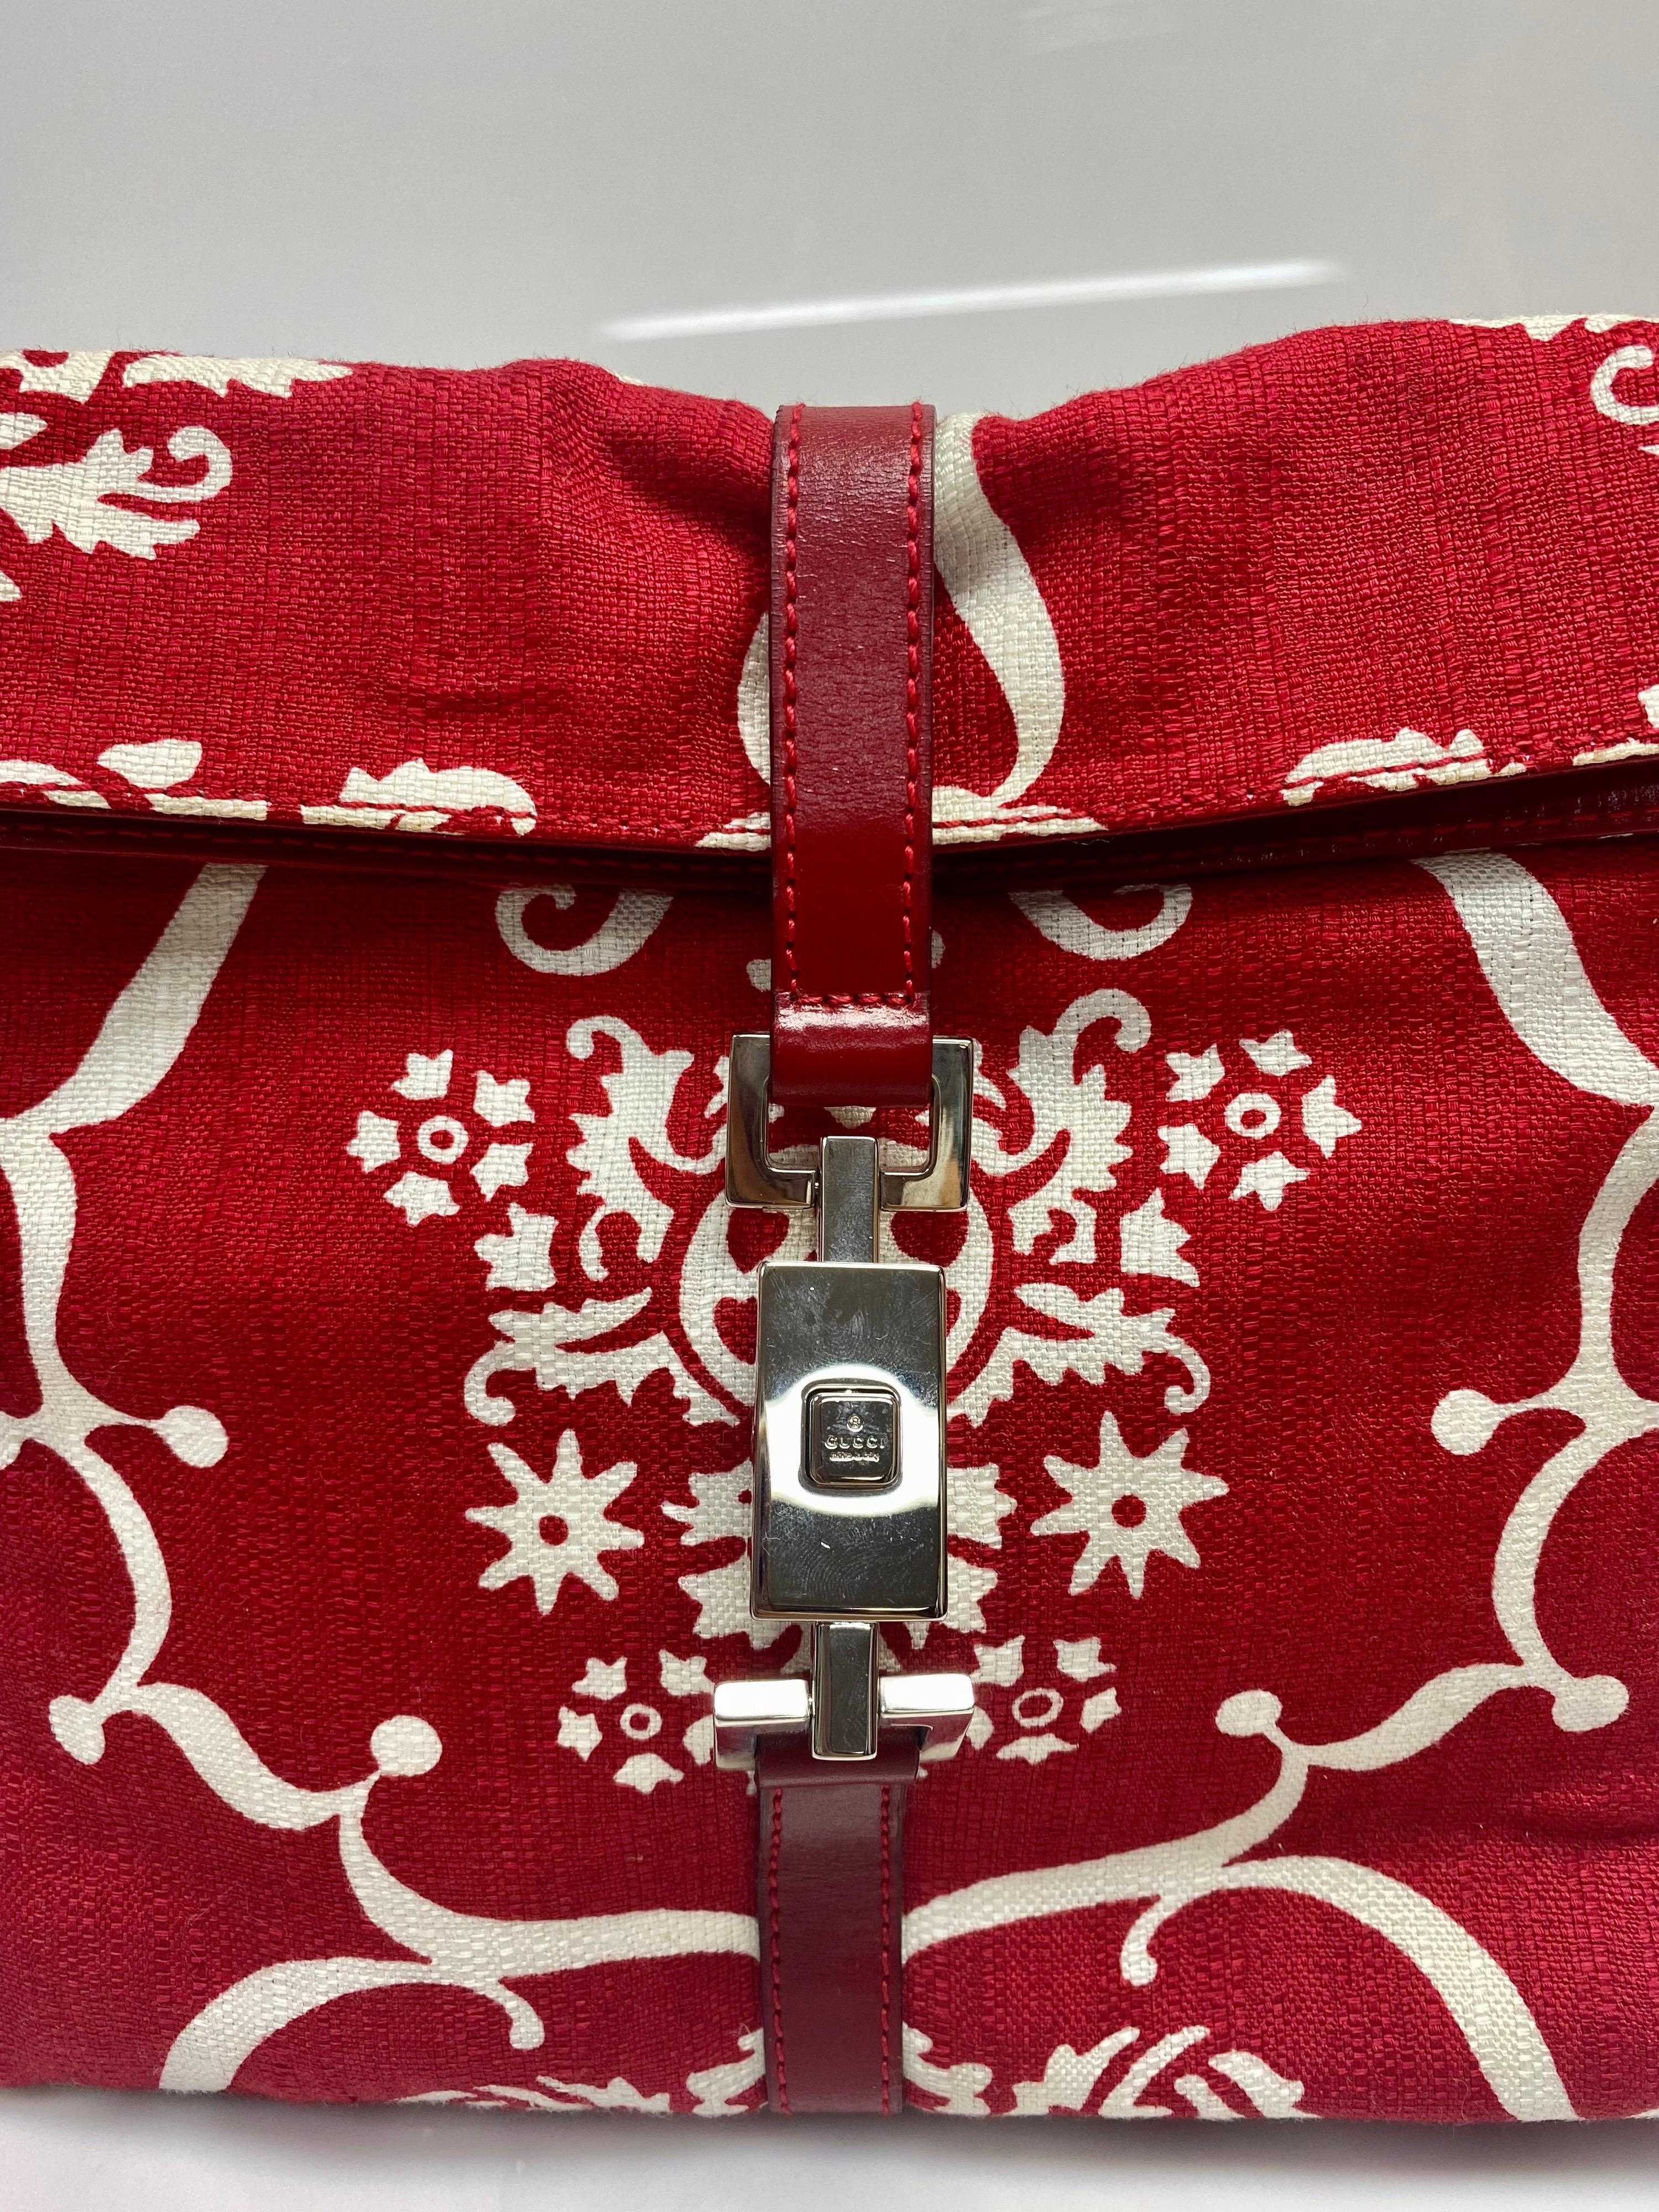 Women's Gucci Fabric Printed Leather Red and White Bag